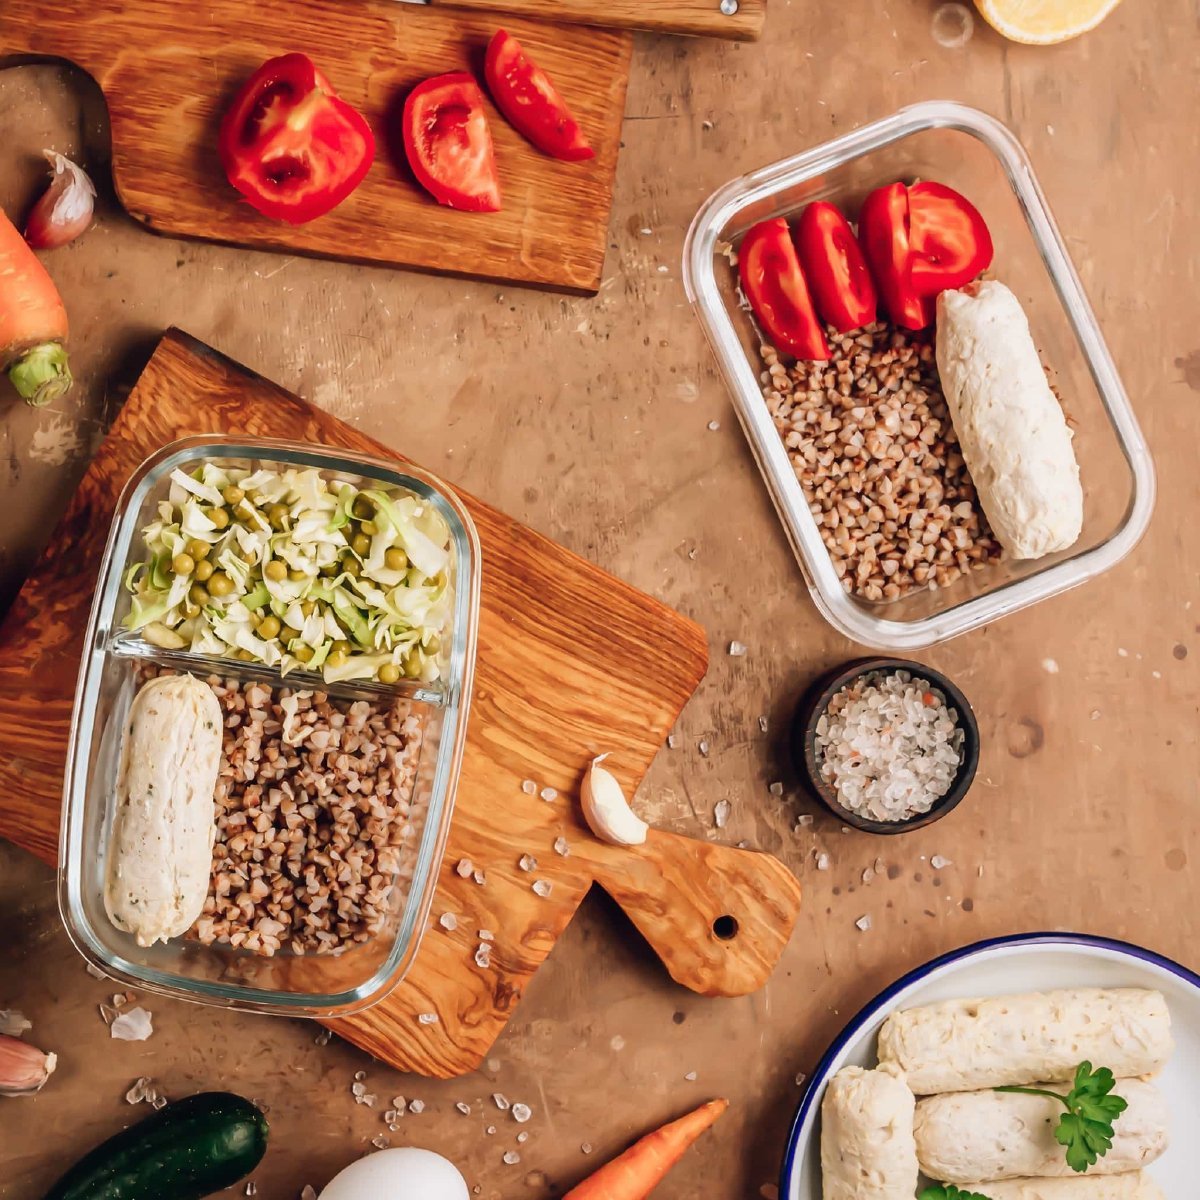 Smart​ Meal Planning: Packing Snacks and Quick ‌Meals for On-The-Go